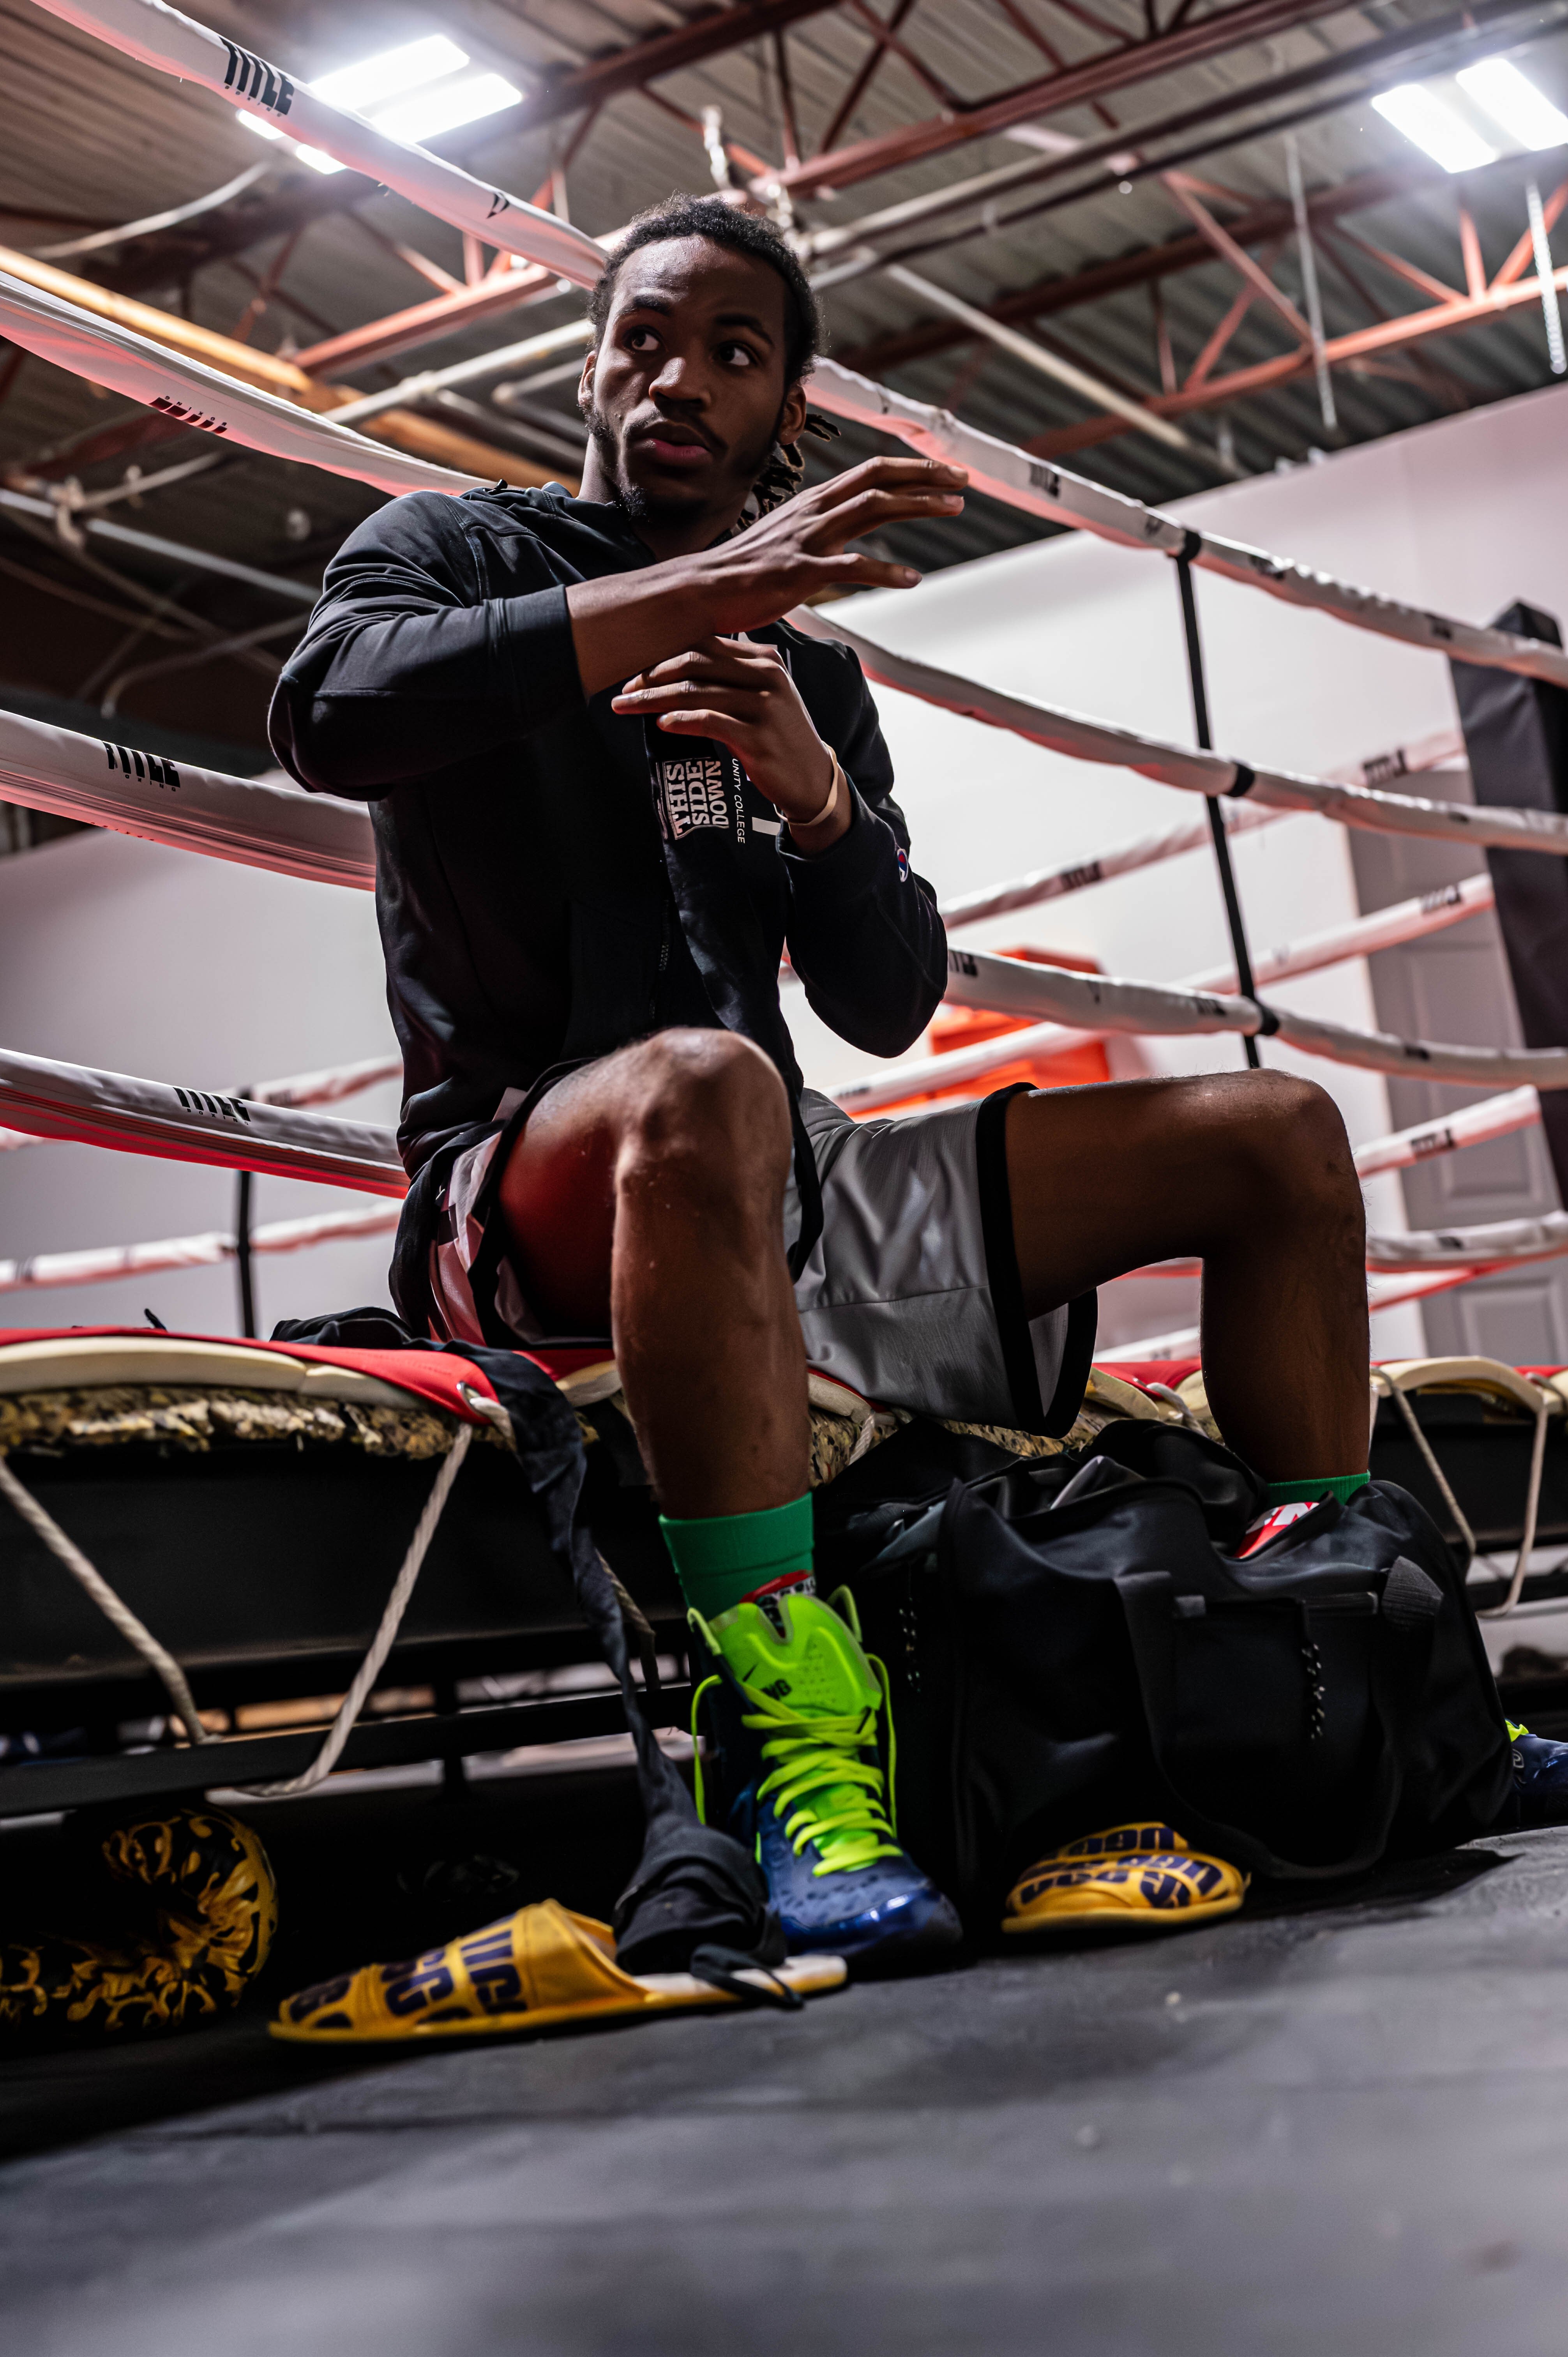 Flint boxer Jaylyn Nichols takes a pause and reflects during his workout before the 'Armageddon in April' fight.